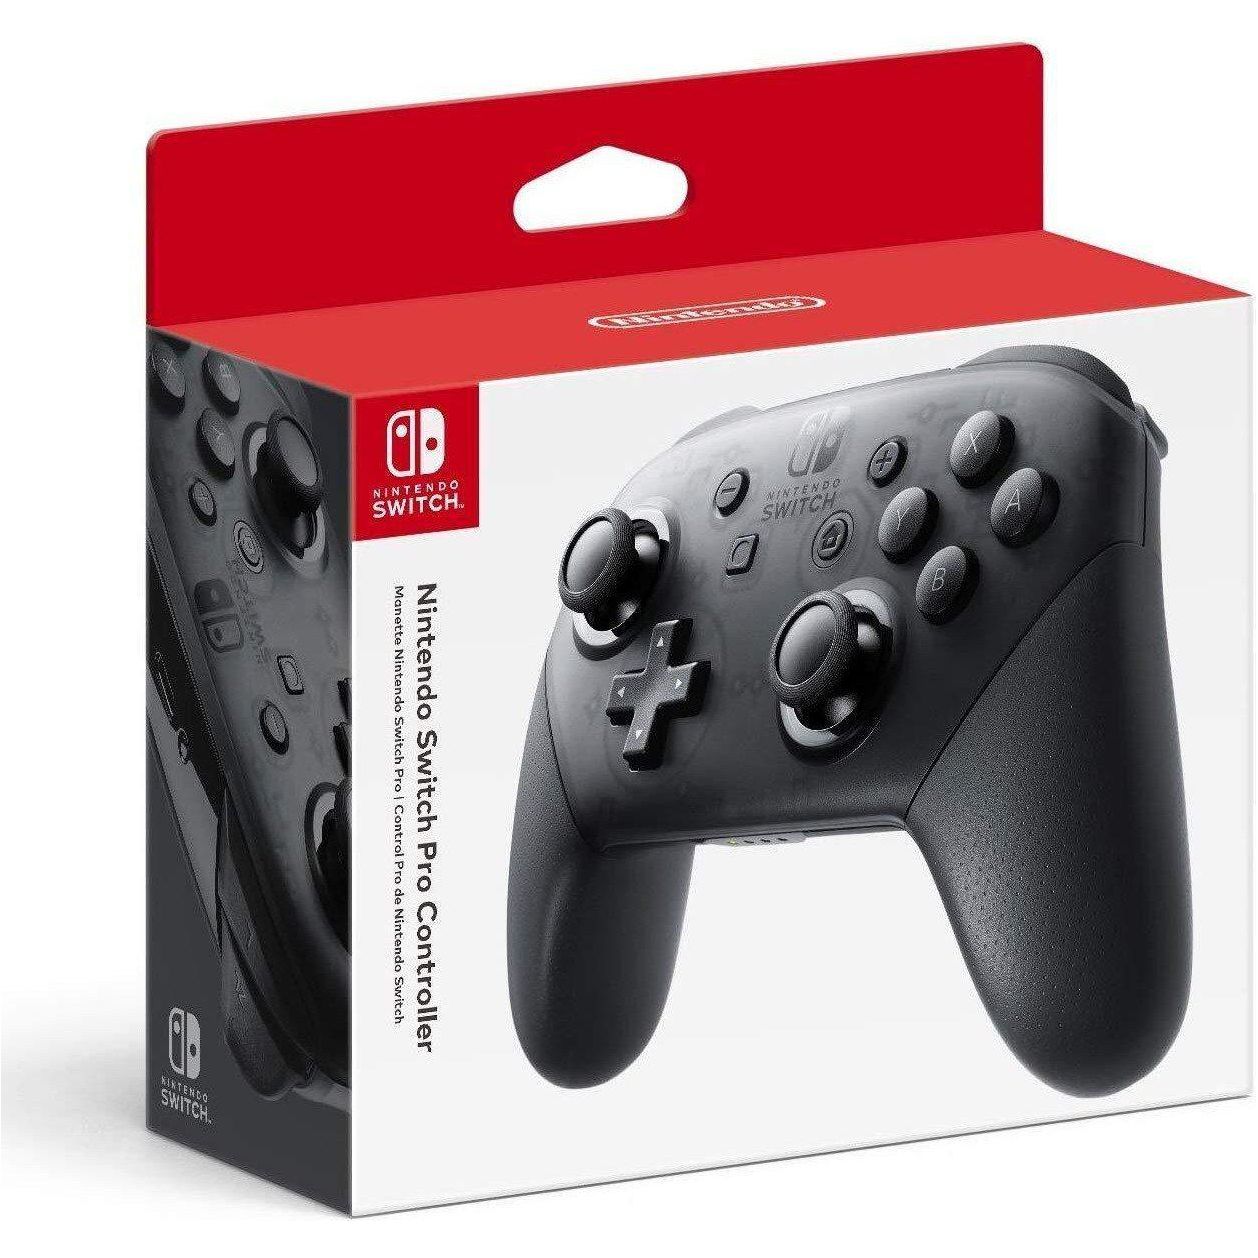 Nintendo Official Switch Pro Controller - Black